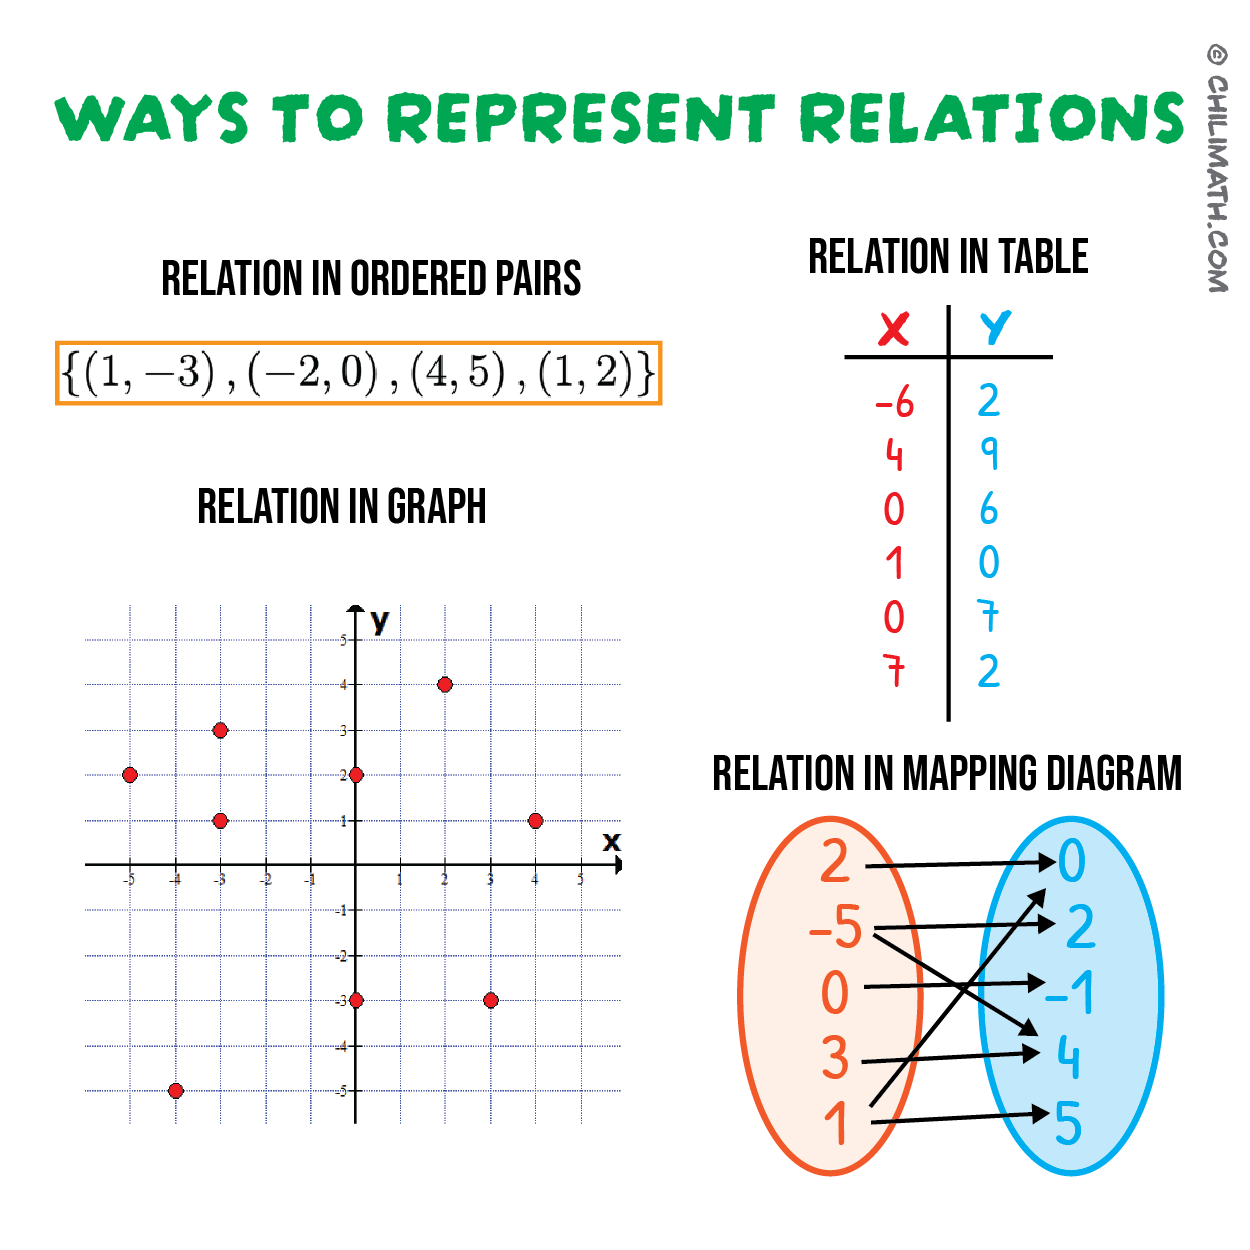 Relations can be represented as ordered pairs, can be shown in tables, can be shown in a graph, and illustrated as mapping diagram